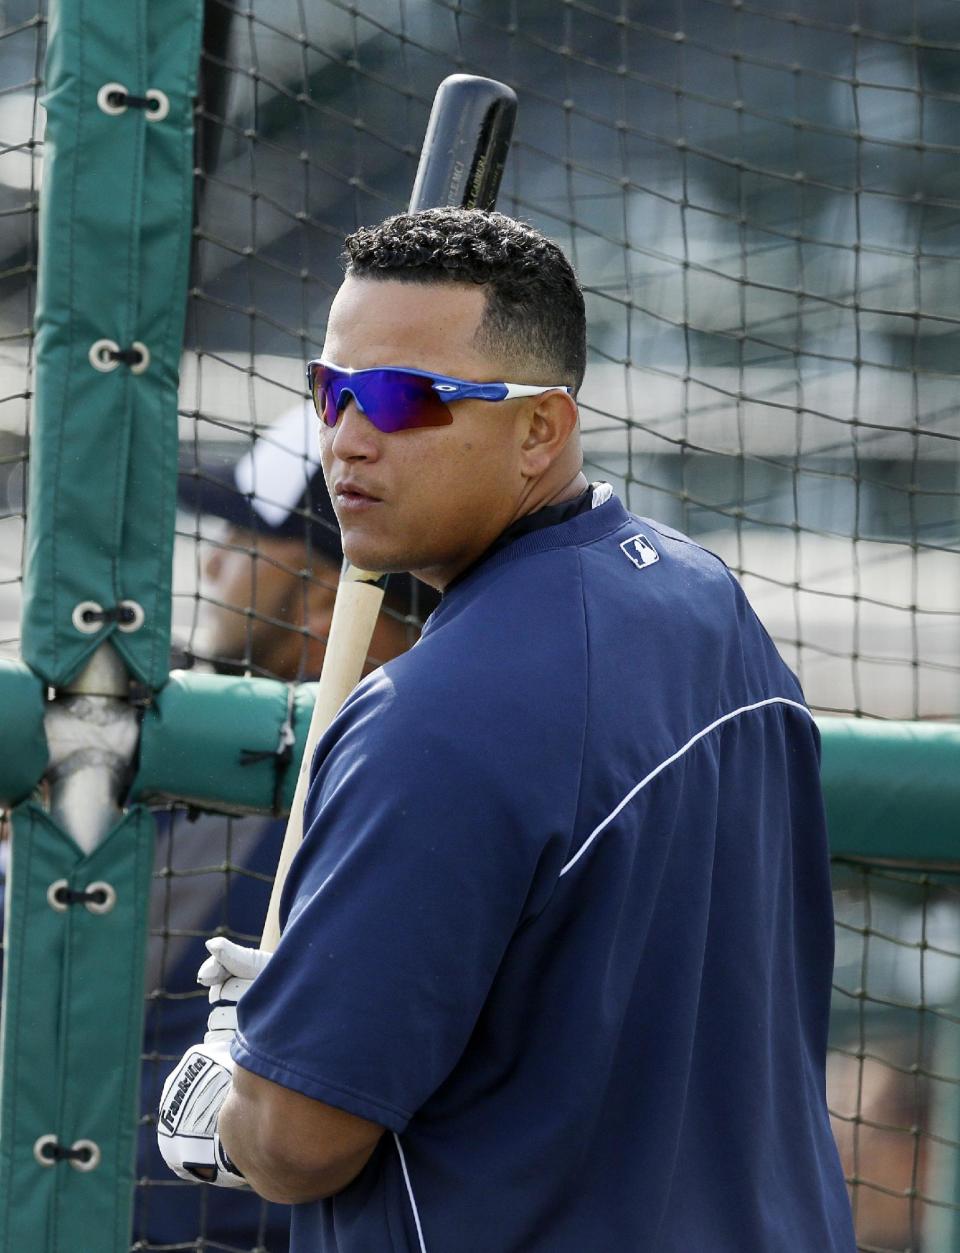 Detroit Tigers first baseman Miguel Cabrera prepares for batting practice before a spring exhibition baseball game against the Tampa Bay Rays in Lakeland, Fla., Friday, March 28, 2014. (AP Photo/Carlos Osorio)